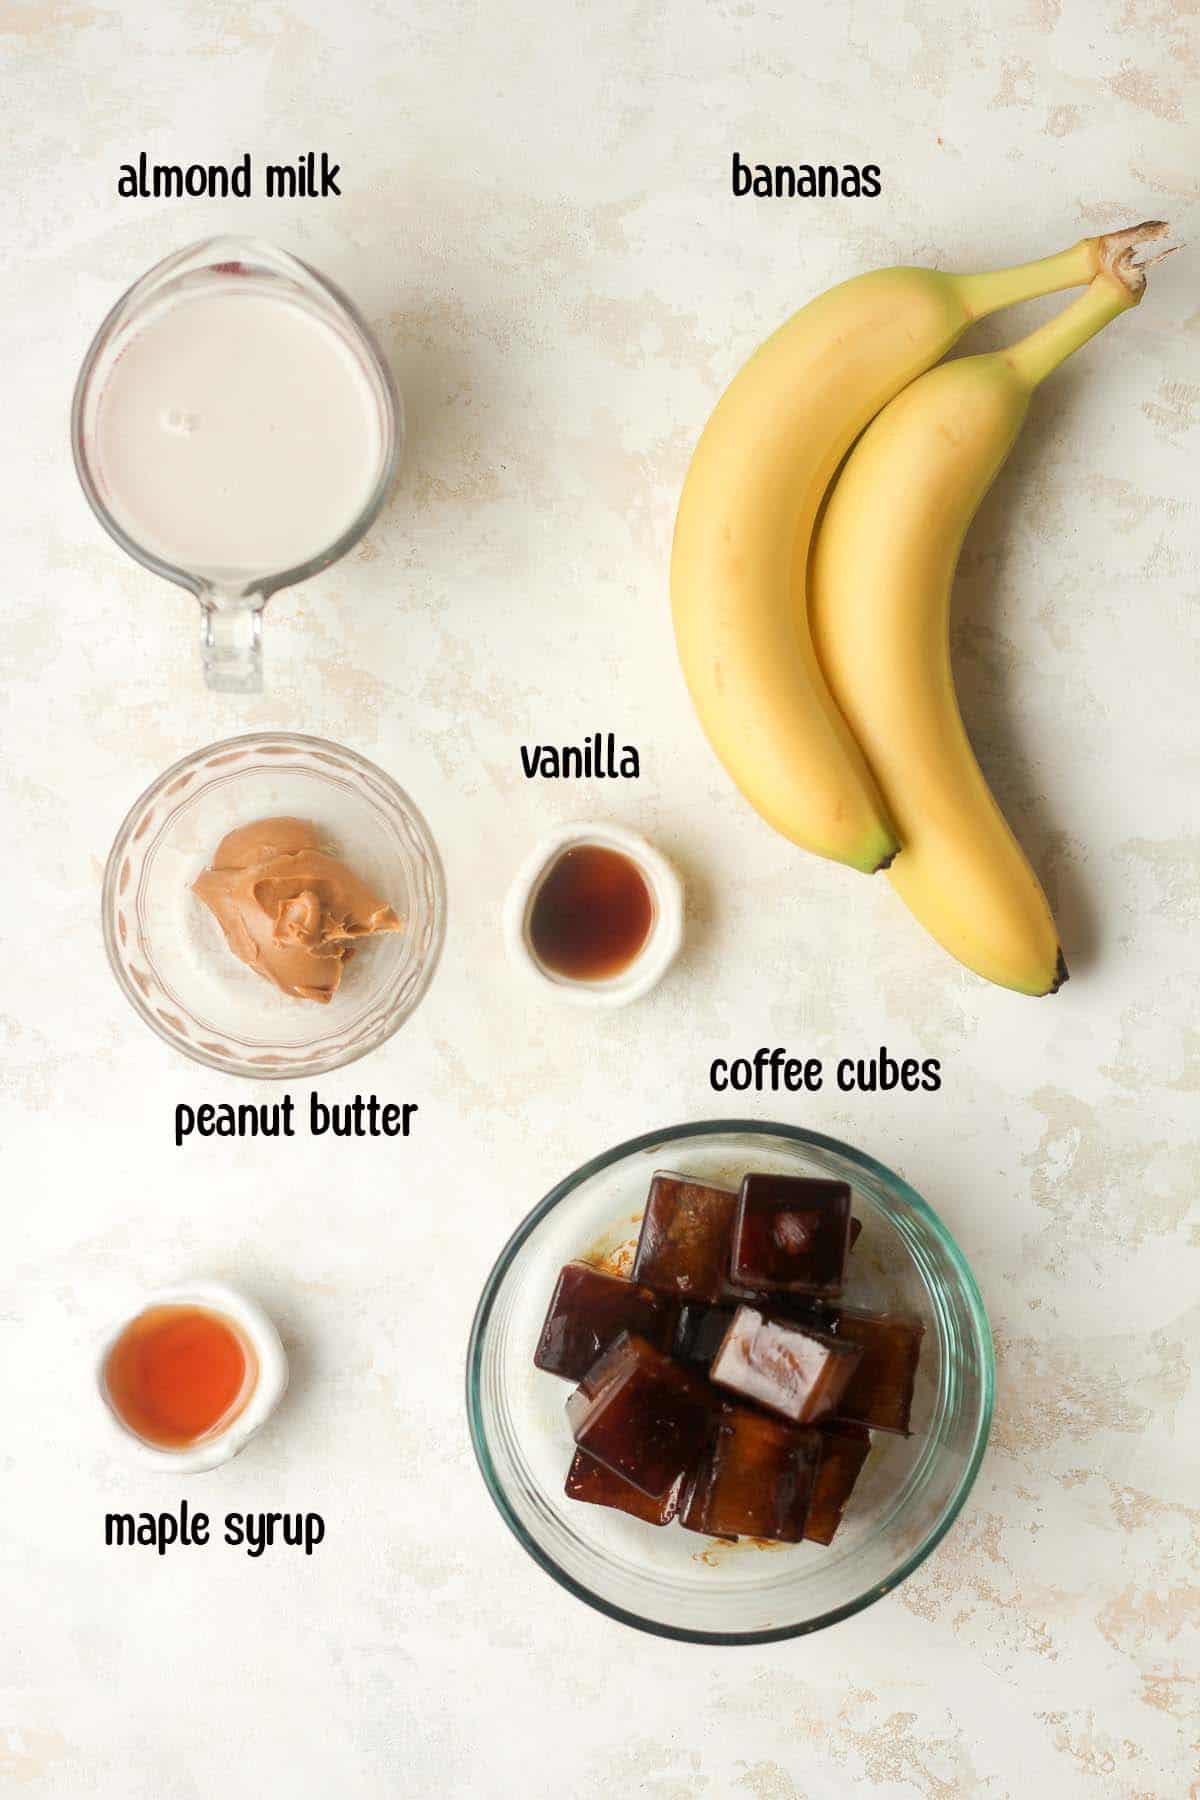 The ingredients for peanut butter coffee smoothies.